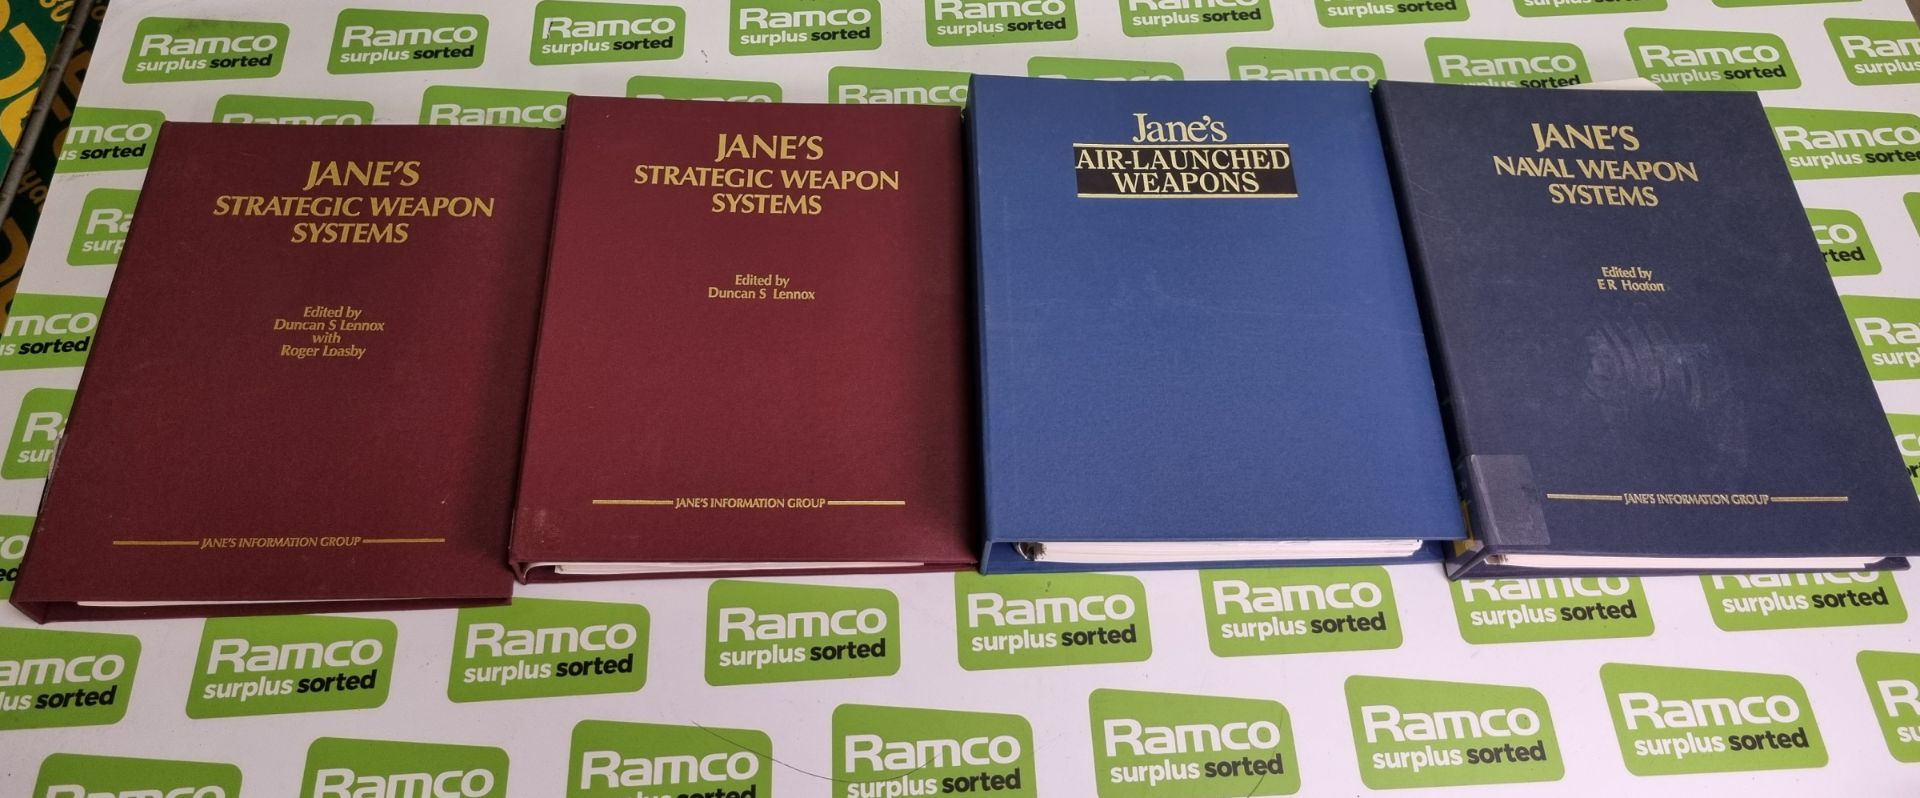 Jane's - Strategic Weapon Systems, Edited by Duncan S Lennox with Roger Loasby, Jane's - Strategic